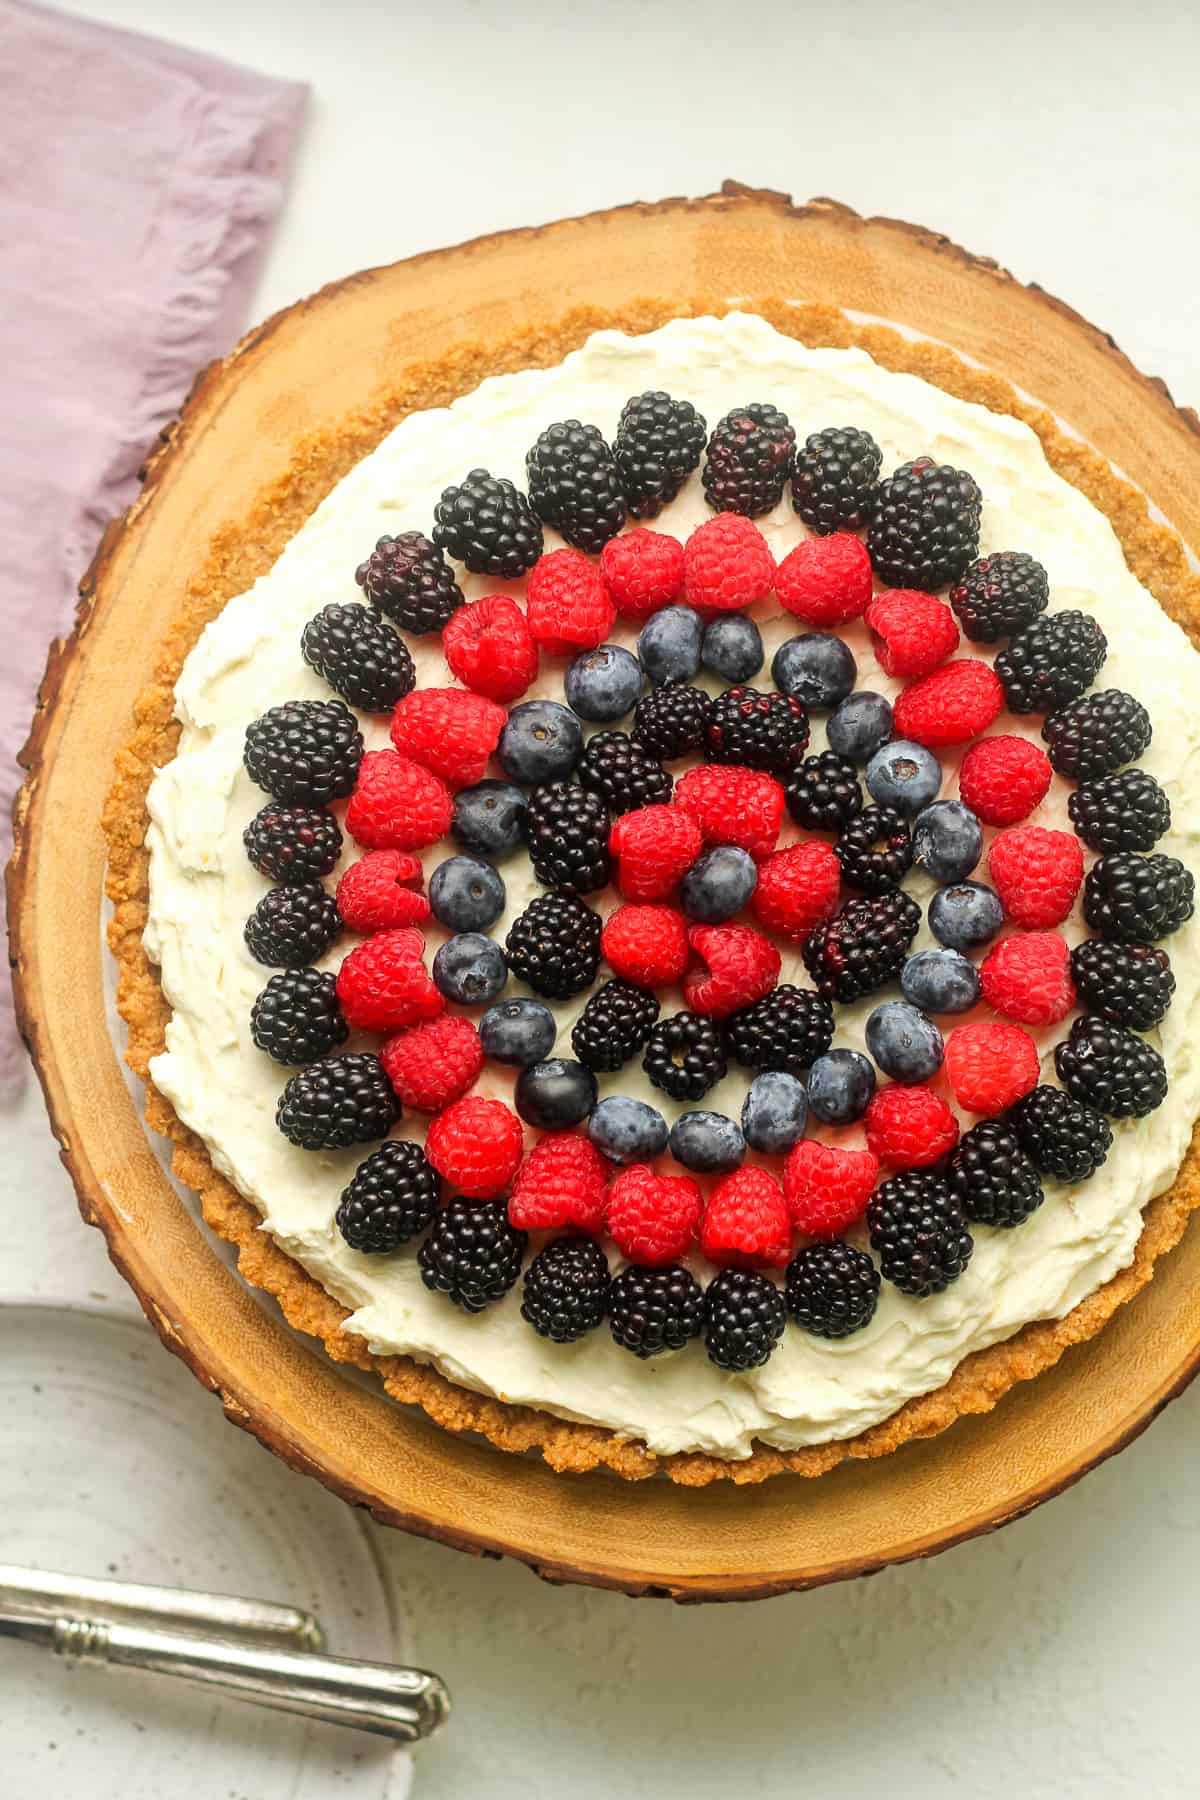 A just made fruit tart with cream cheese filling.